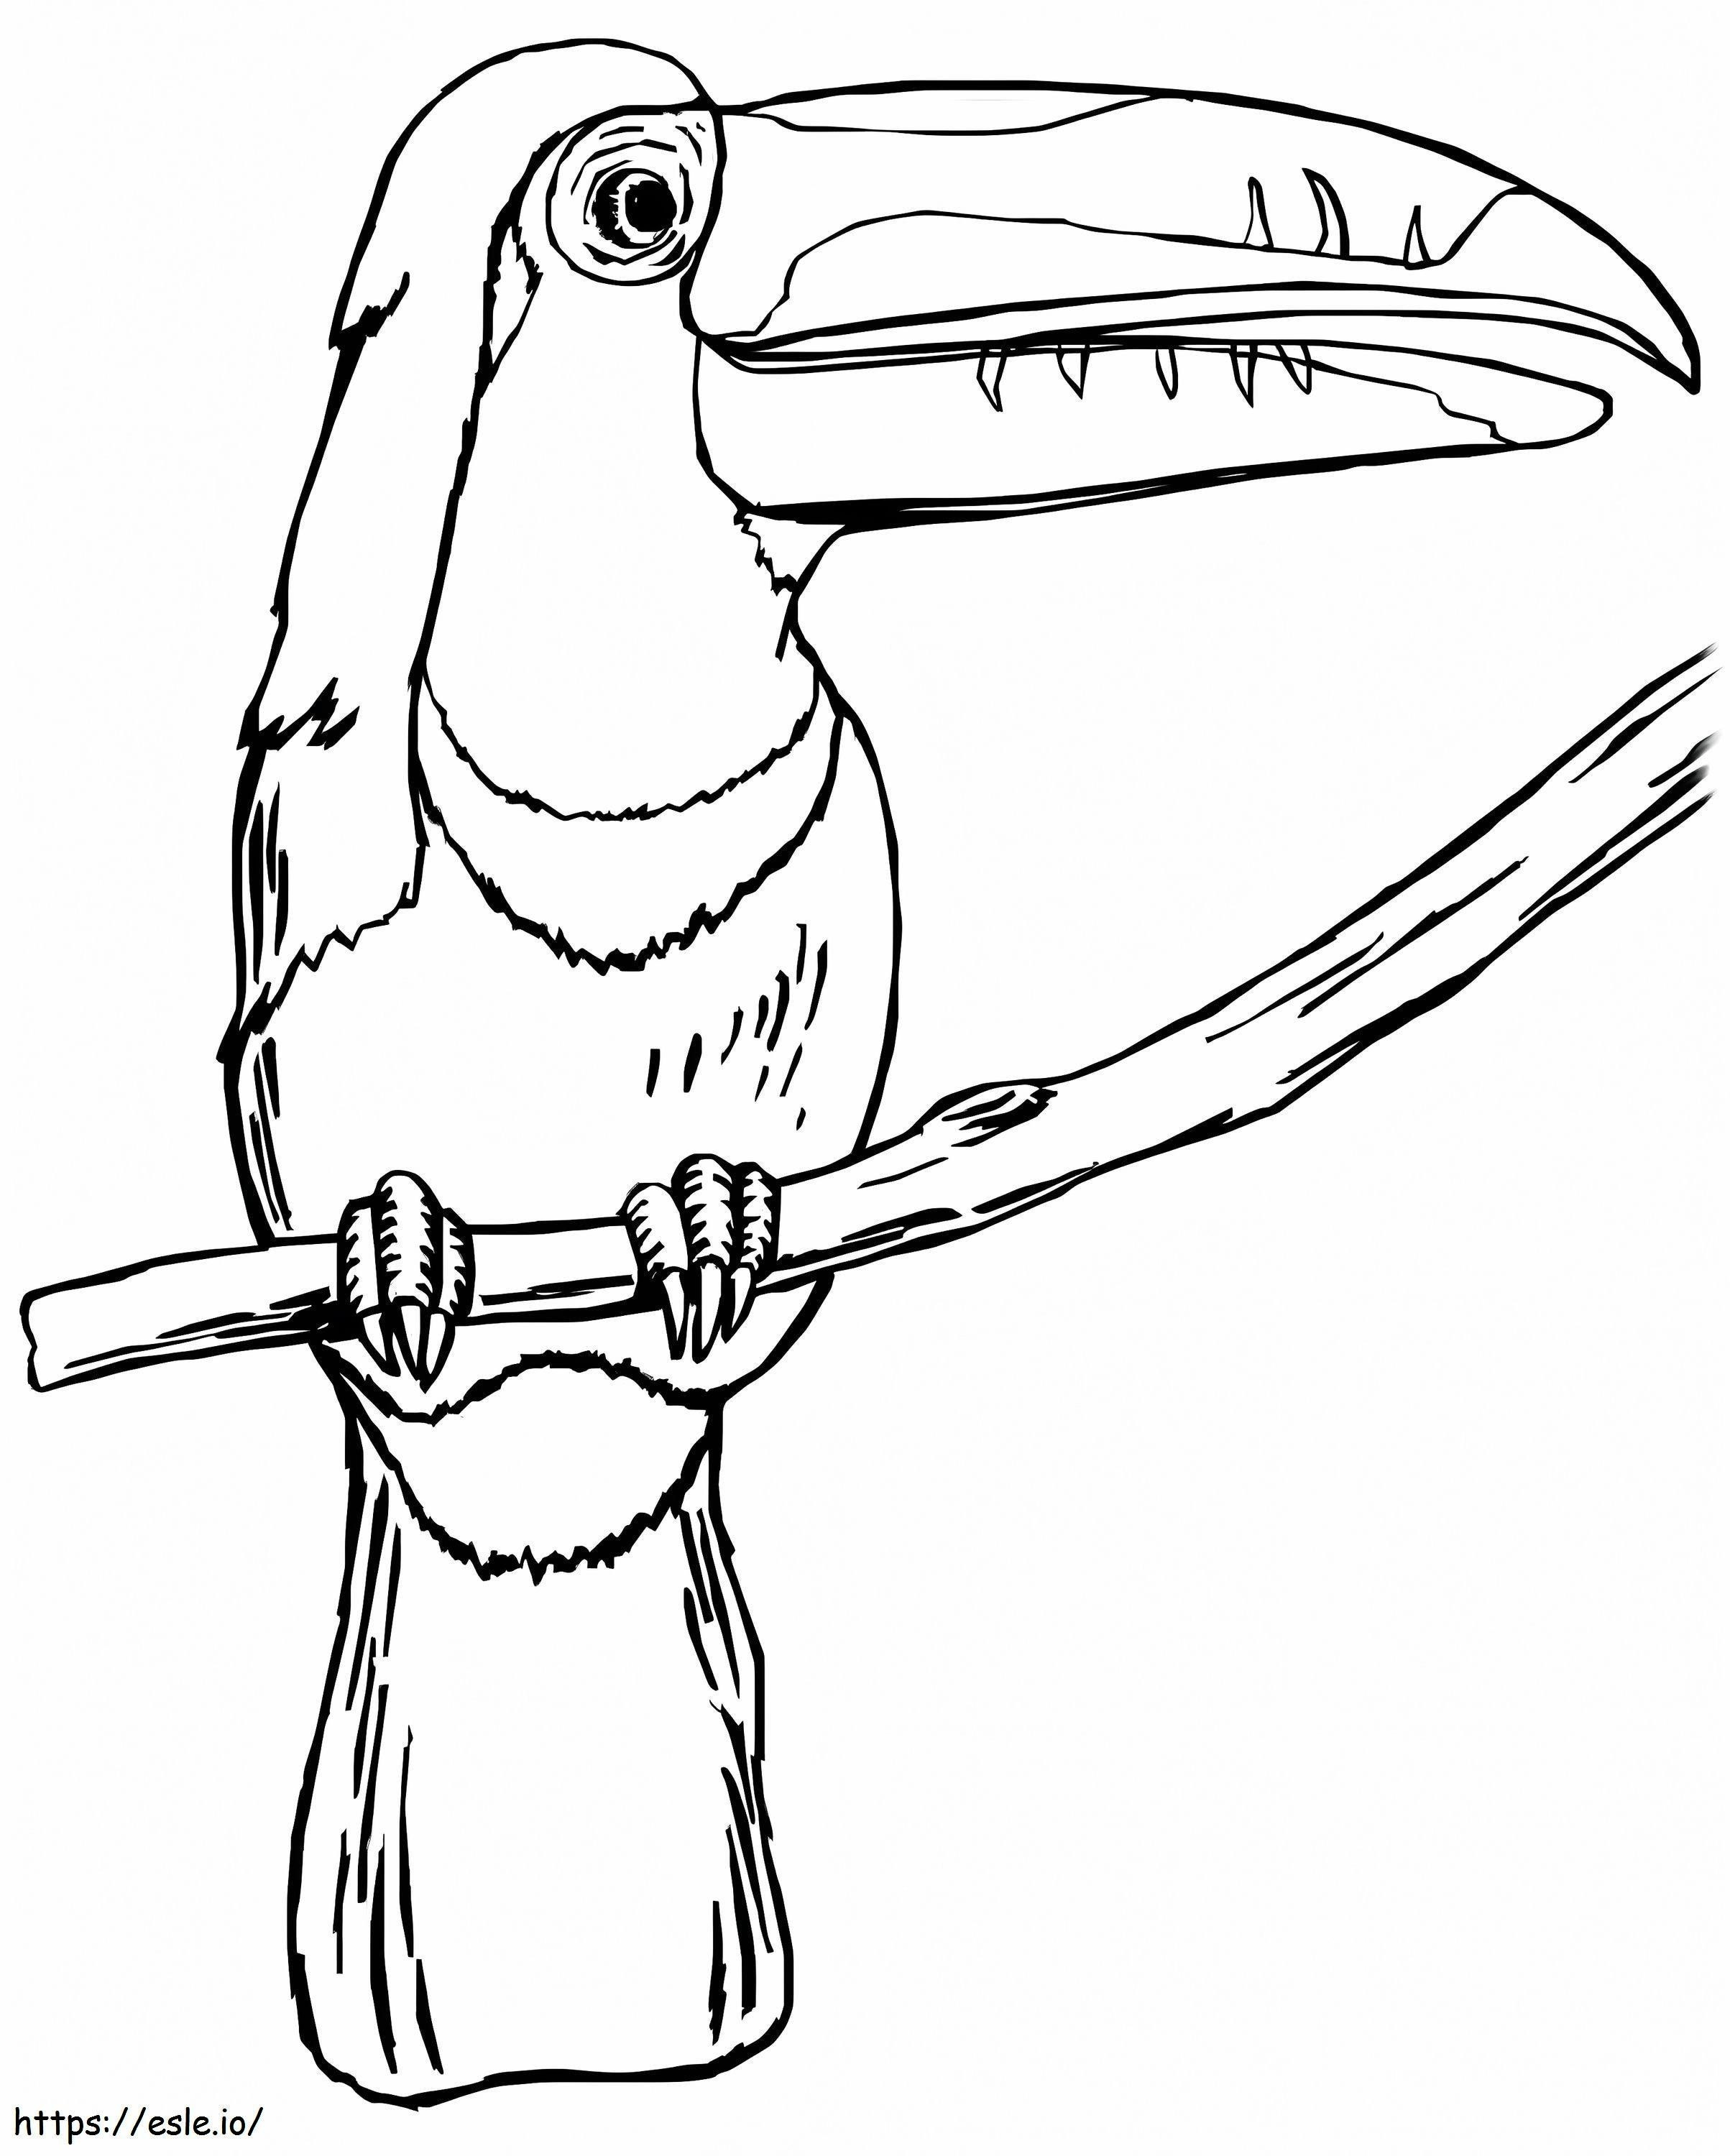 Toucan On A Branch coloring page